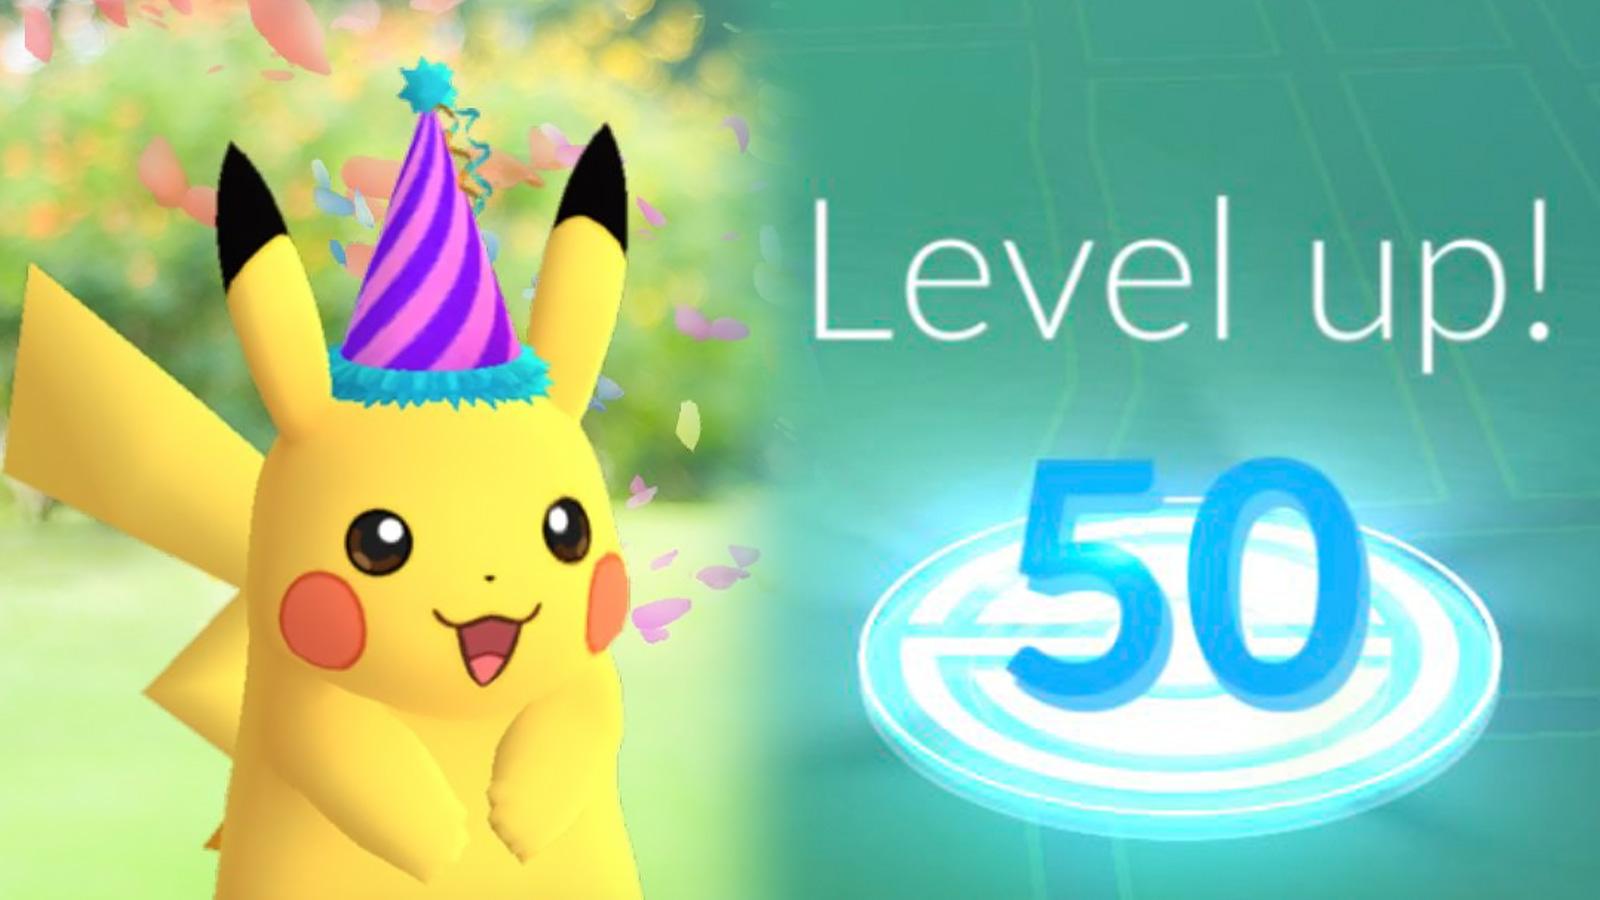 Pokemon Go trainer becomes world's first level 50 player during Twitch  stream - Dexerto